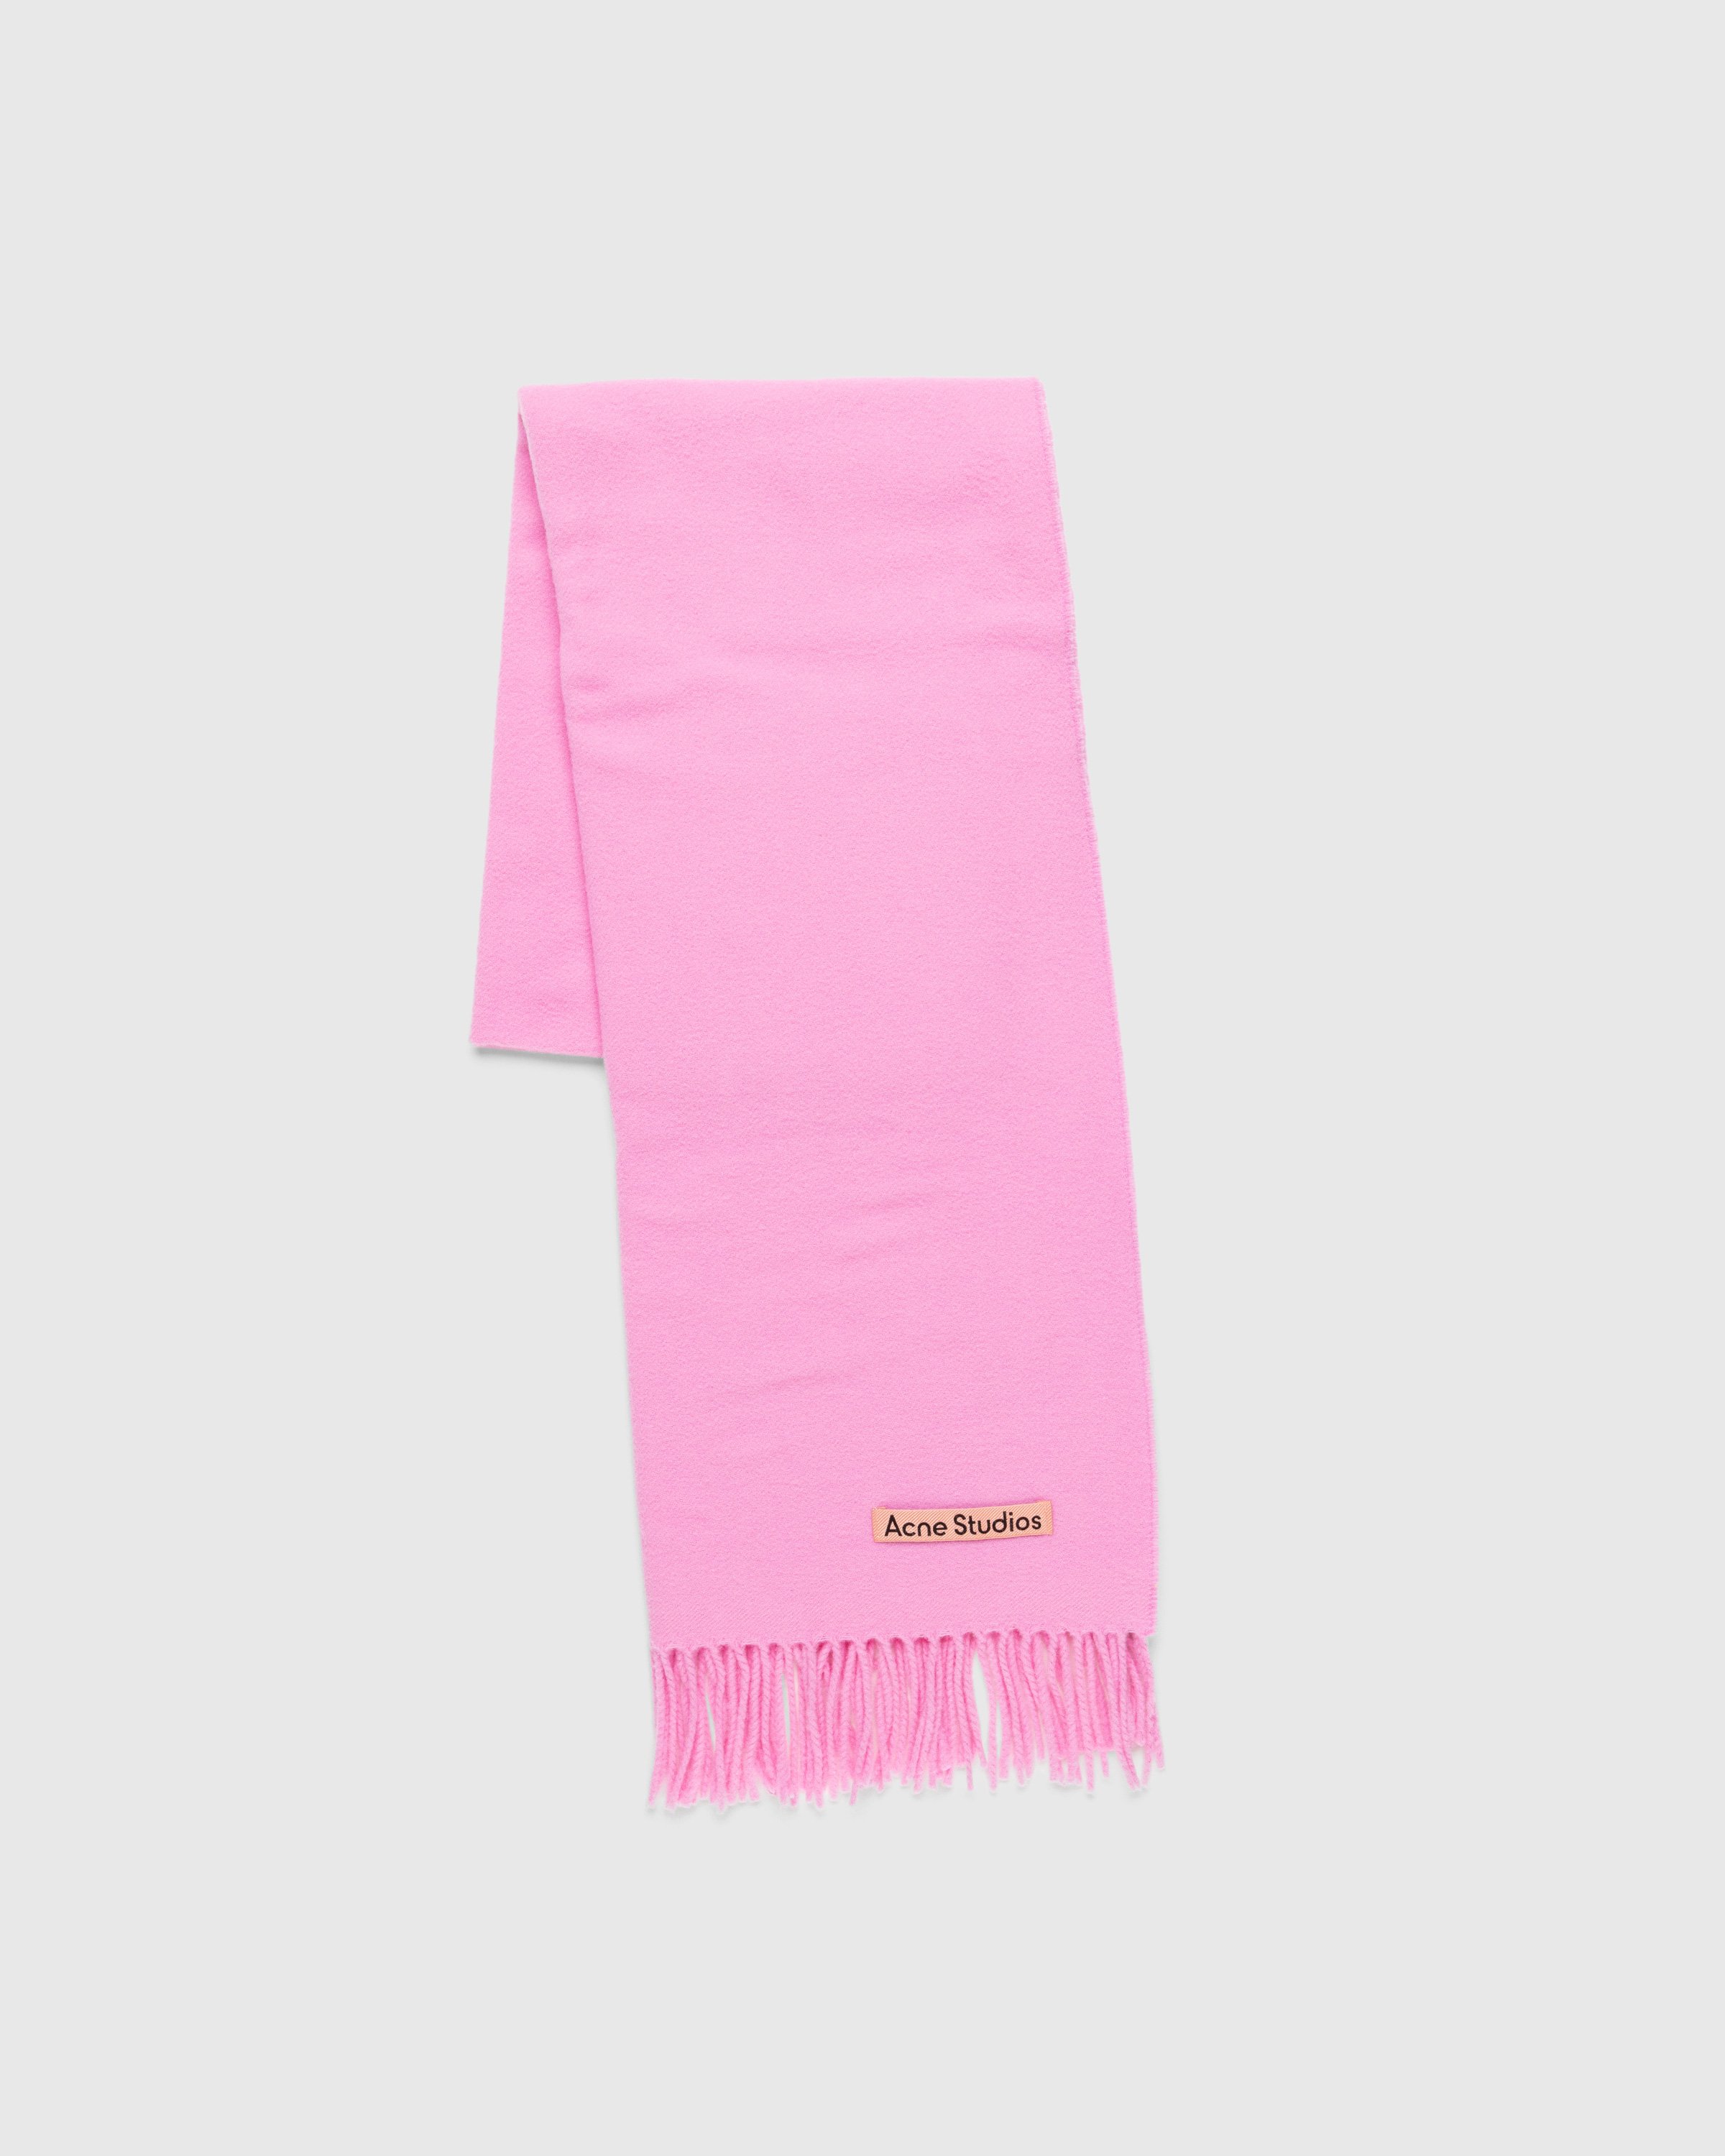 Acne Studios - Fringe Wool Scarf Bubble Pink - Accessories - Pink - Image 1